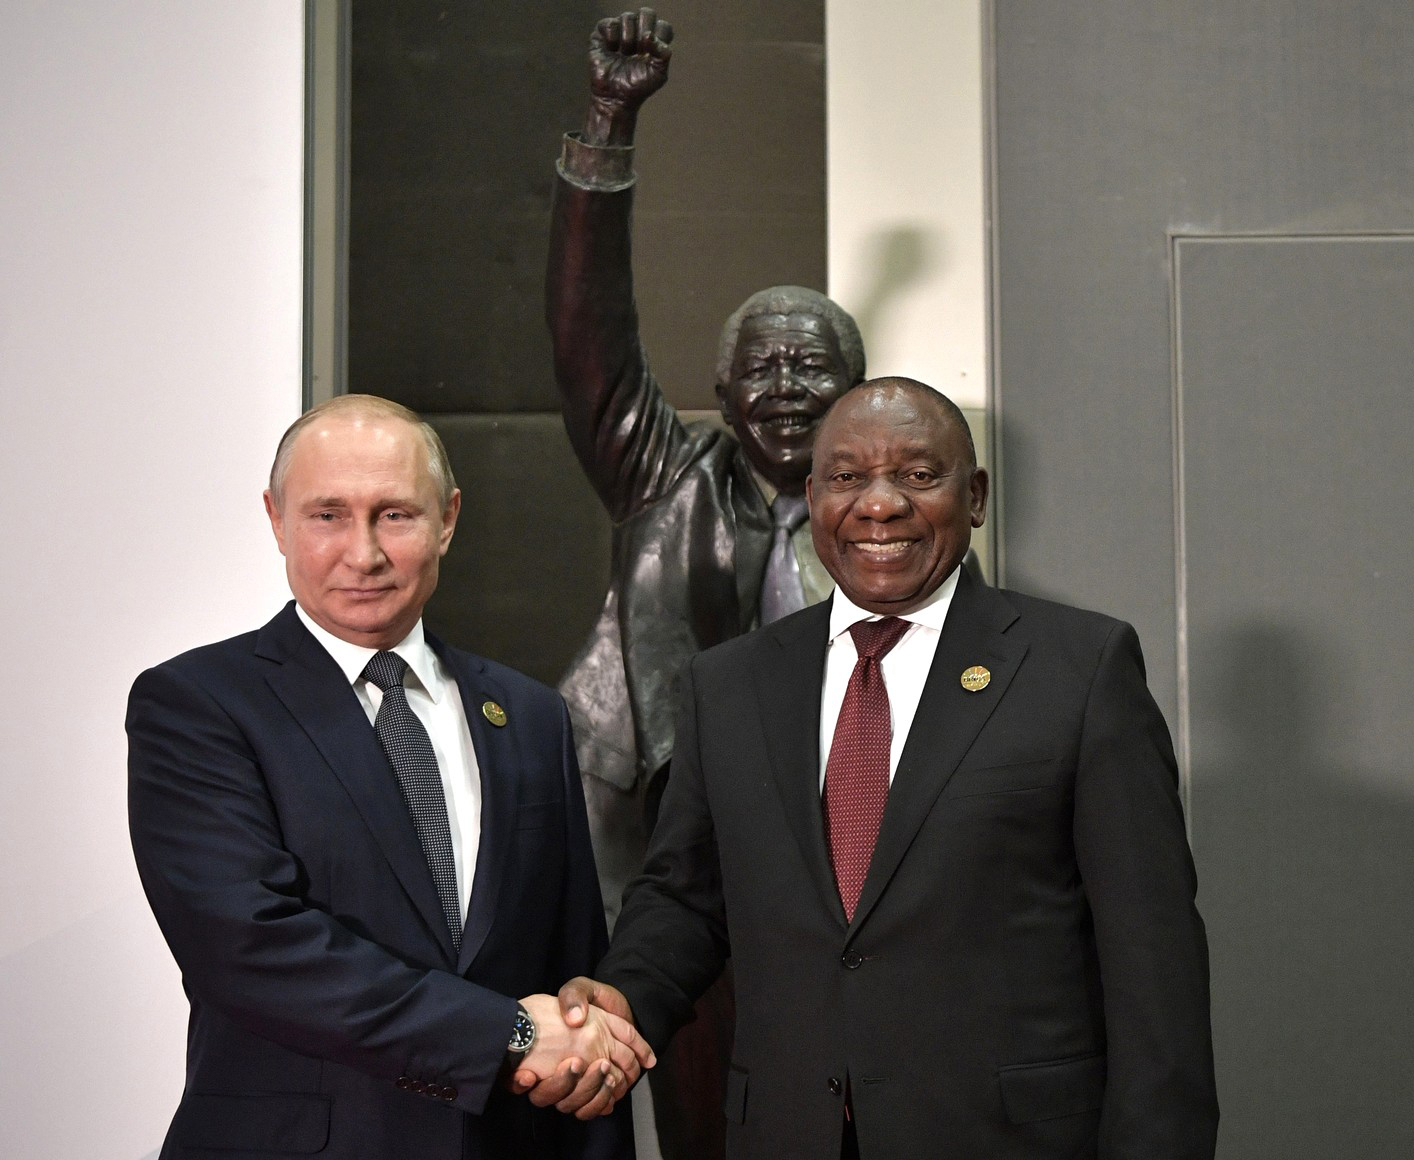 South Africa To Withdraw From ICC After Putin Arrest Warrant